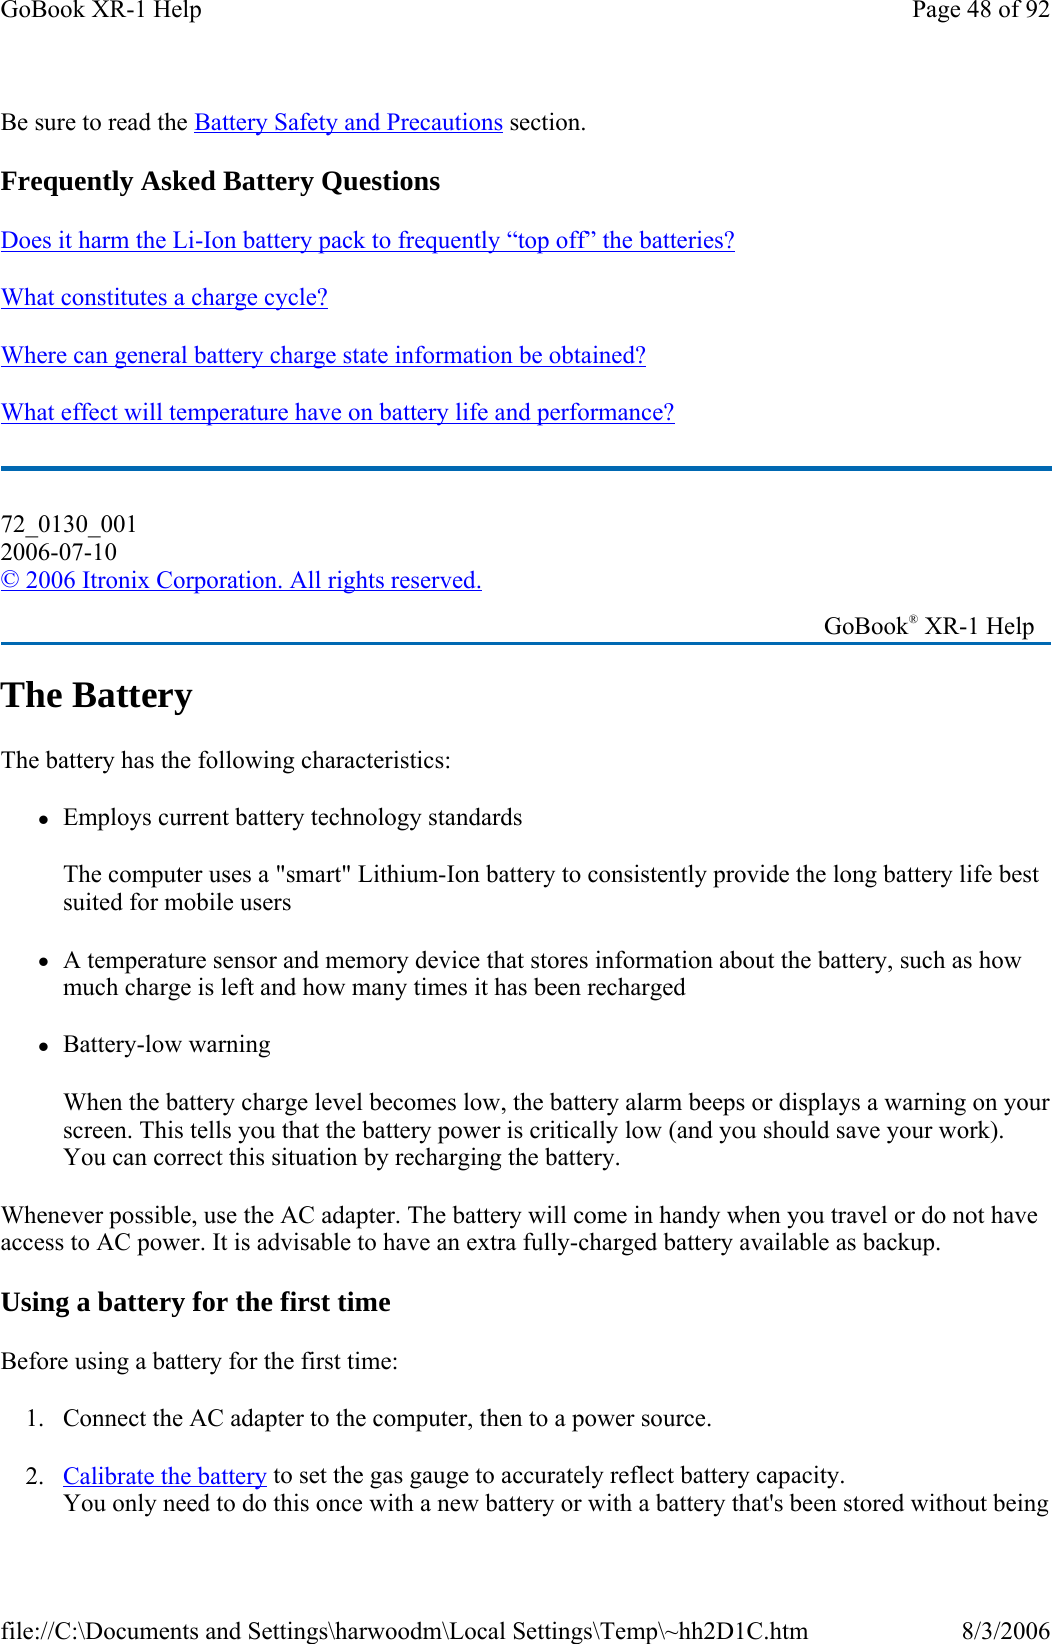 Be sure to read the Battery Safety and Precautions section. Frequently Asked Battery Questions Does it harm the Li-Ion battery pack to frequently “top off” the batteries?   What constitutes a charge cycle?  Where can general battery charge state information be obtained?  What effect will temperature have on battery life and performance?  The Battery The battery has the following characteristics:  zEmploys current battery technology standards The computer uses a &quot;smart&quot; Lithium-Ion battery to consistently provide the long battery life best suited for mobile users zA temperature sensor and memory device that stores information about the battery, such as how much charge is left and how many times it has been recharged zBattery-low warning When the battery charge level becomes low, the battery alarm beeps or displays a warning on your screen. This tells you that the battery power is critically low (and you should save your work). You can correct this situation by recharging the battery. Whenever possible, use the AC adapter. The battery will come in handy when you travel or do not have access to AC power. It is advisable to have an extra fully-charged battery available as backup.  Using a battery for the first time Before using a battery for the first time: 1. Connect the AC adapter to the computer, then to a power source. 2. Calibrate the battery to set the gas gauge to accurately reflect battery capacity. You only need to do this once with a new battery or with a battery that&apos;s been stored without being 72_0130_001 2006-07-10 © 2006 Itronix Corporation. All rights reserved.   GoBook® XR-1 Help Page 48 of 92GoBook XR-1 Help8/3/2006file://C:\Documents and Settings\harwoodm\Local Settings\Temp\~hh2D1C.htm